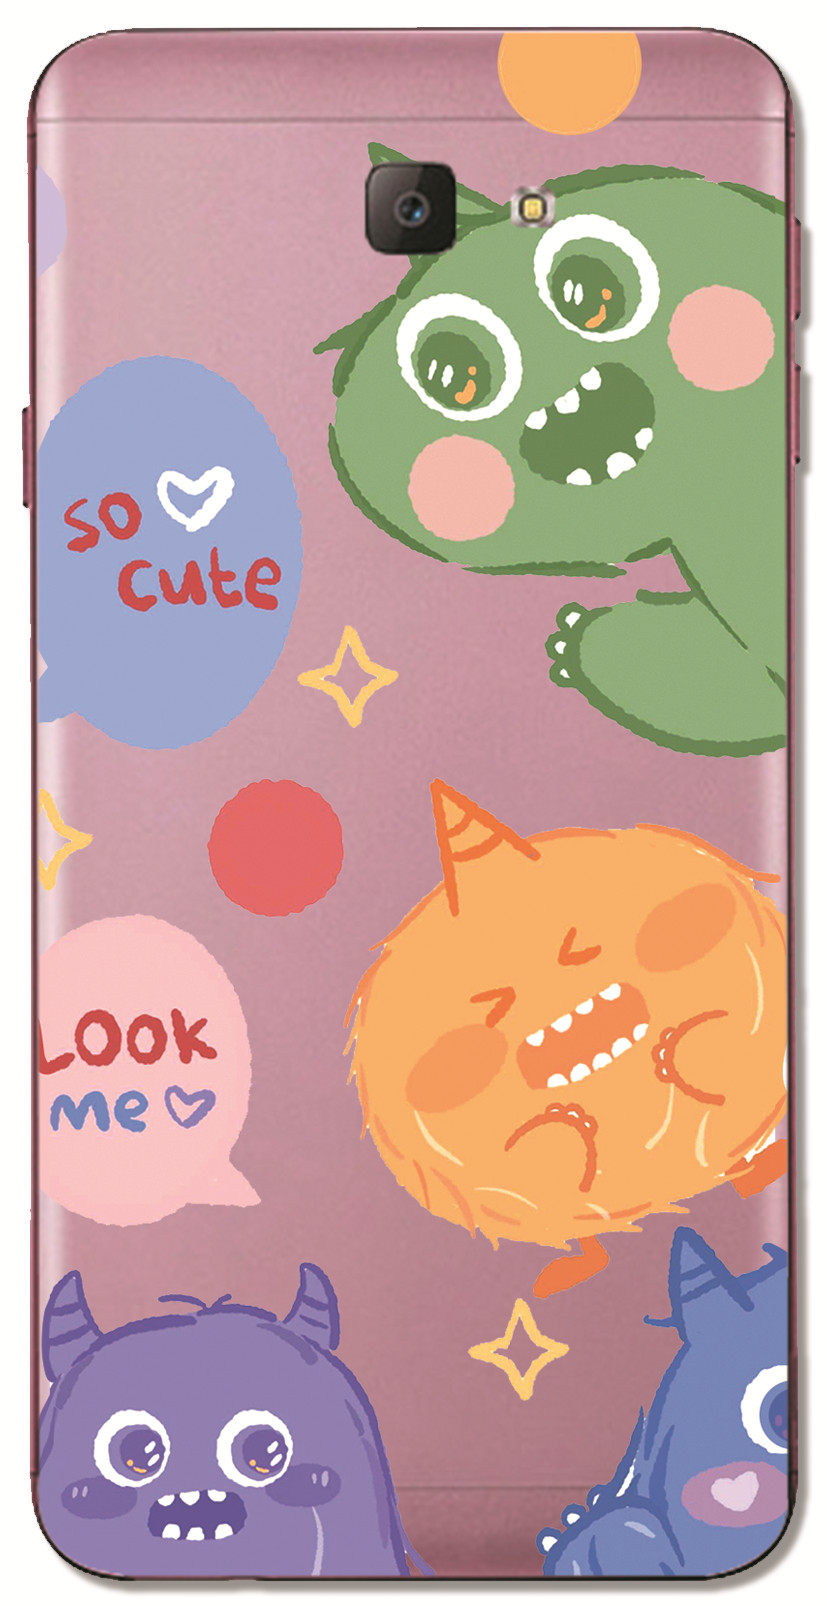 Samsung Galaxy A7 A5 A3 2017/A720 A520 A320 A6S A8S A9 A8 Star INS Cute Cartoon Big eyes Monster Clear Soft Silicone TPU Phone Casing Lovely Furry monster Case Back Cover Couple